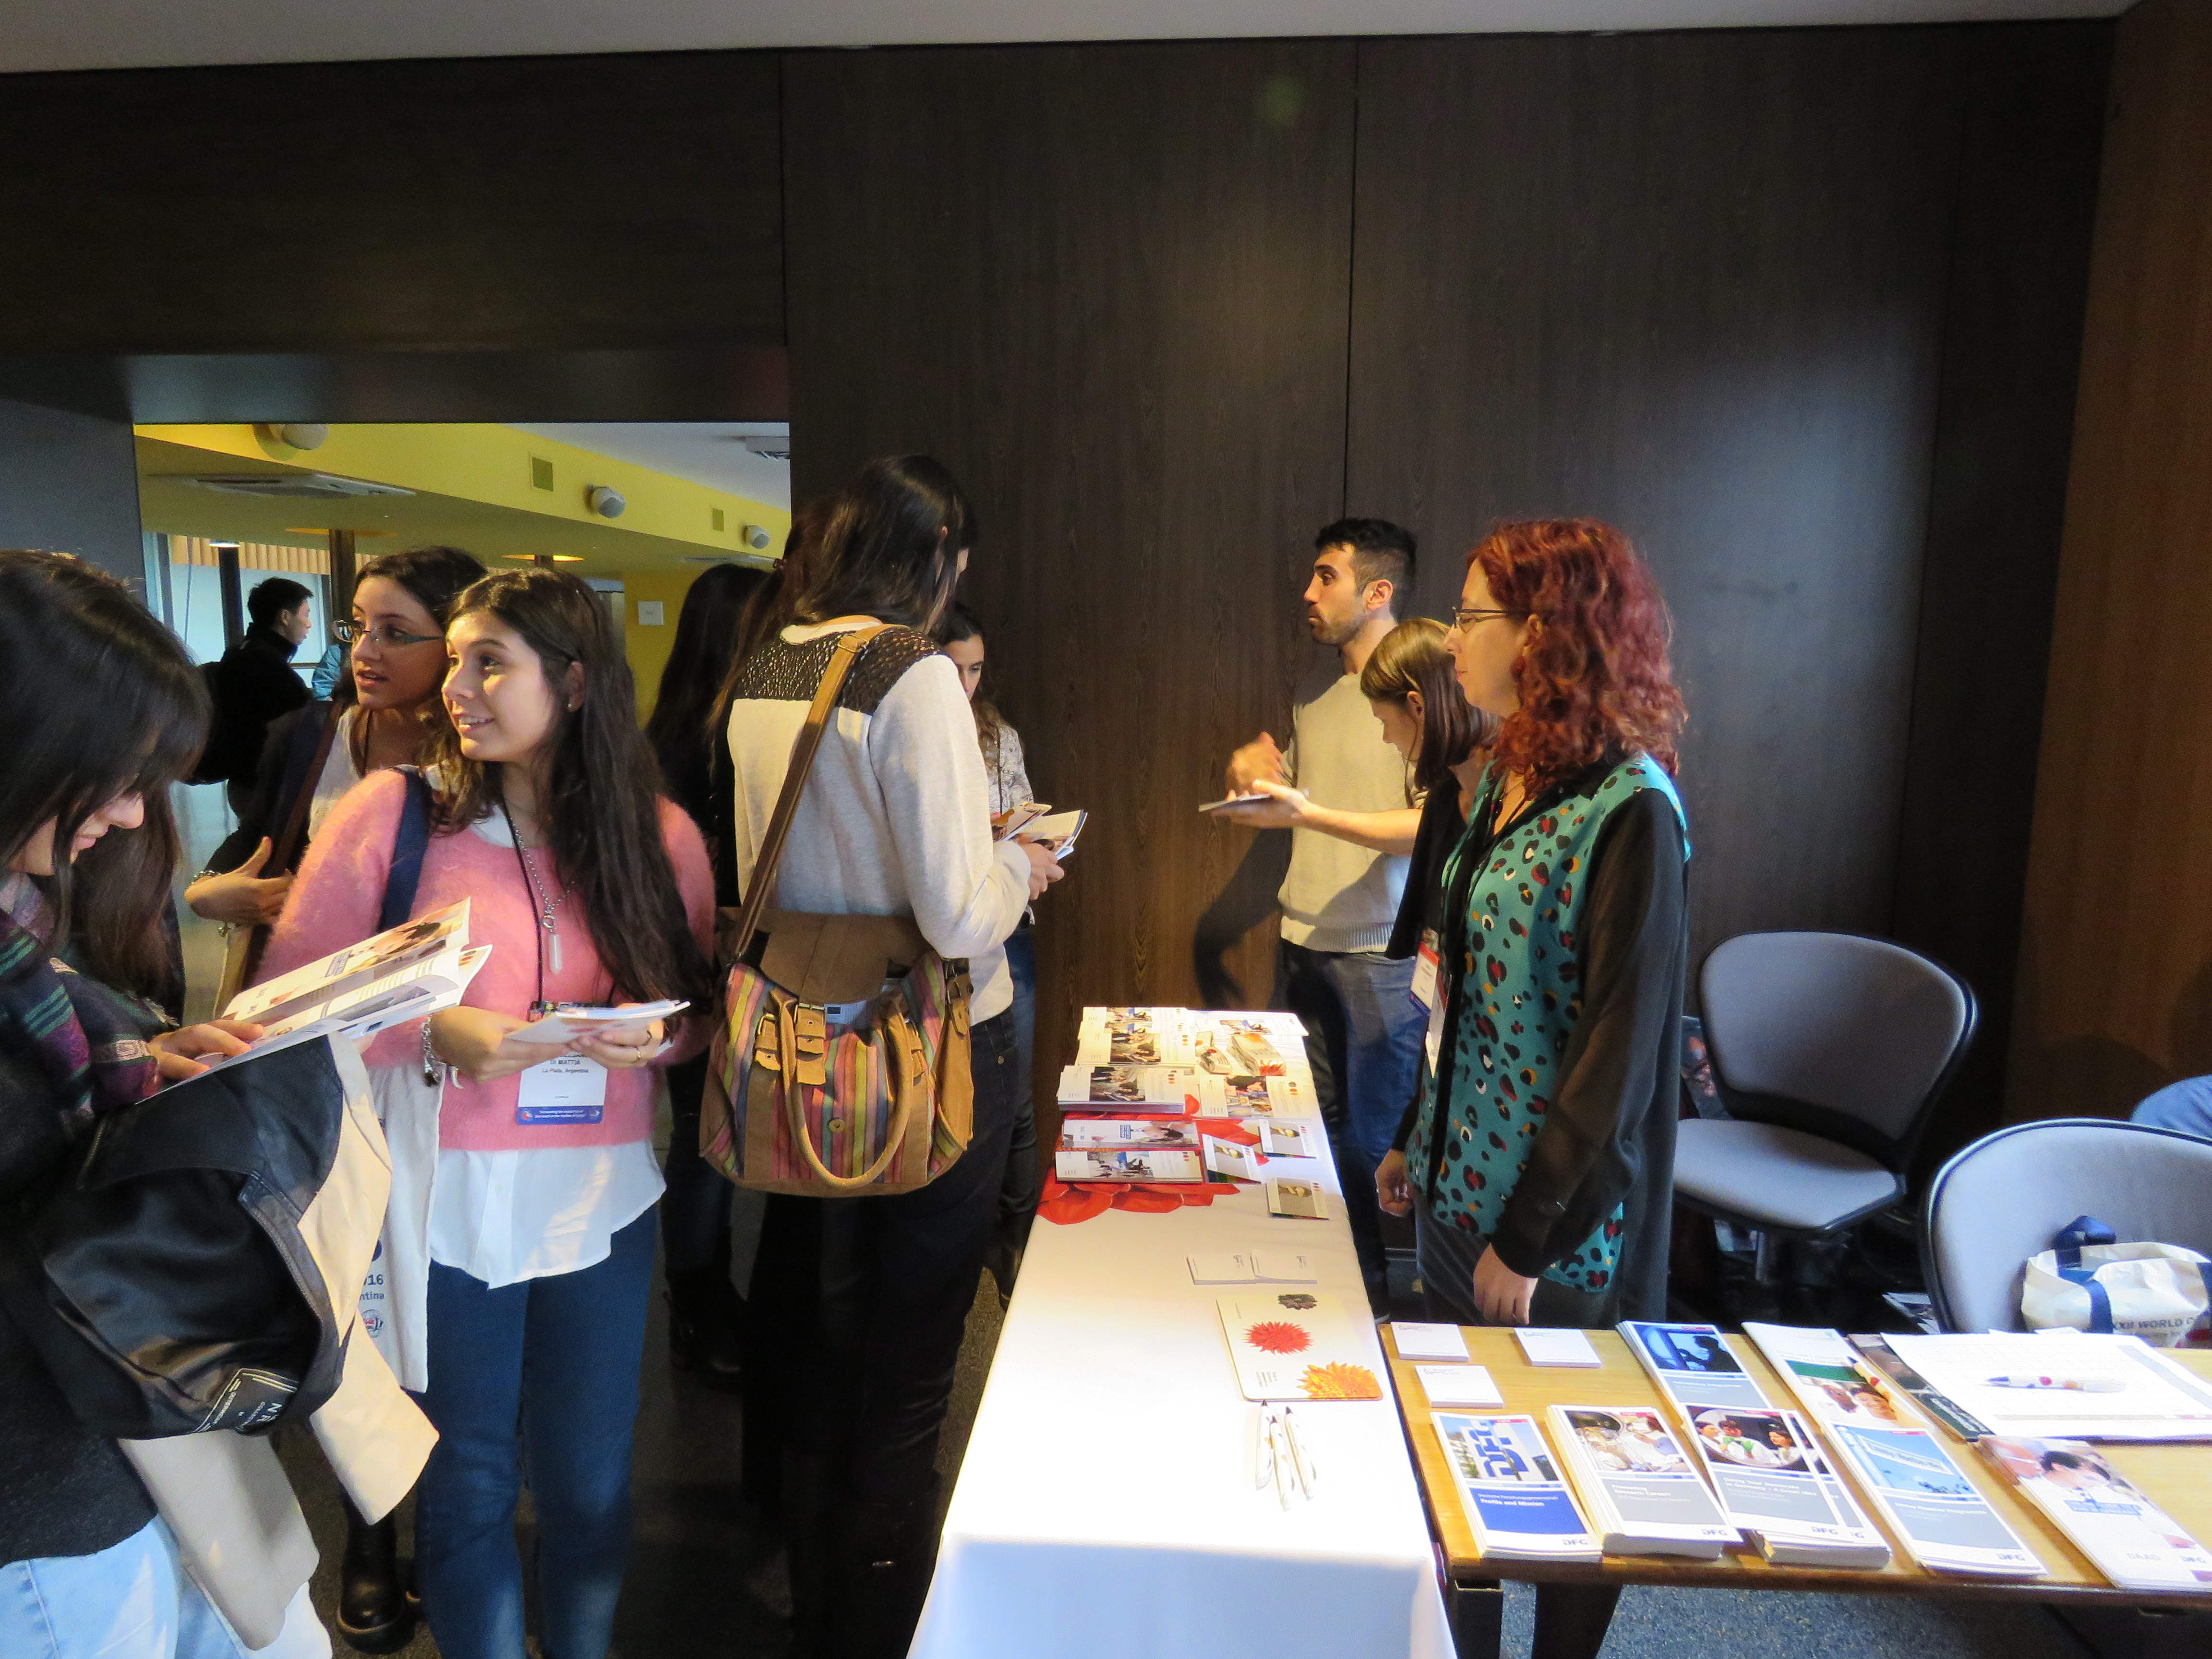 Conference delegates obtain advice at the "Research in Germany" information table.